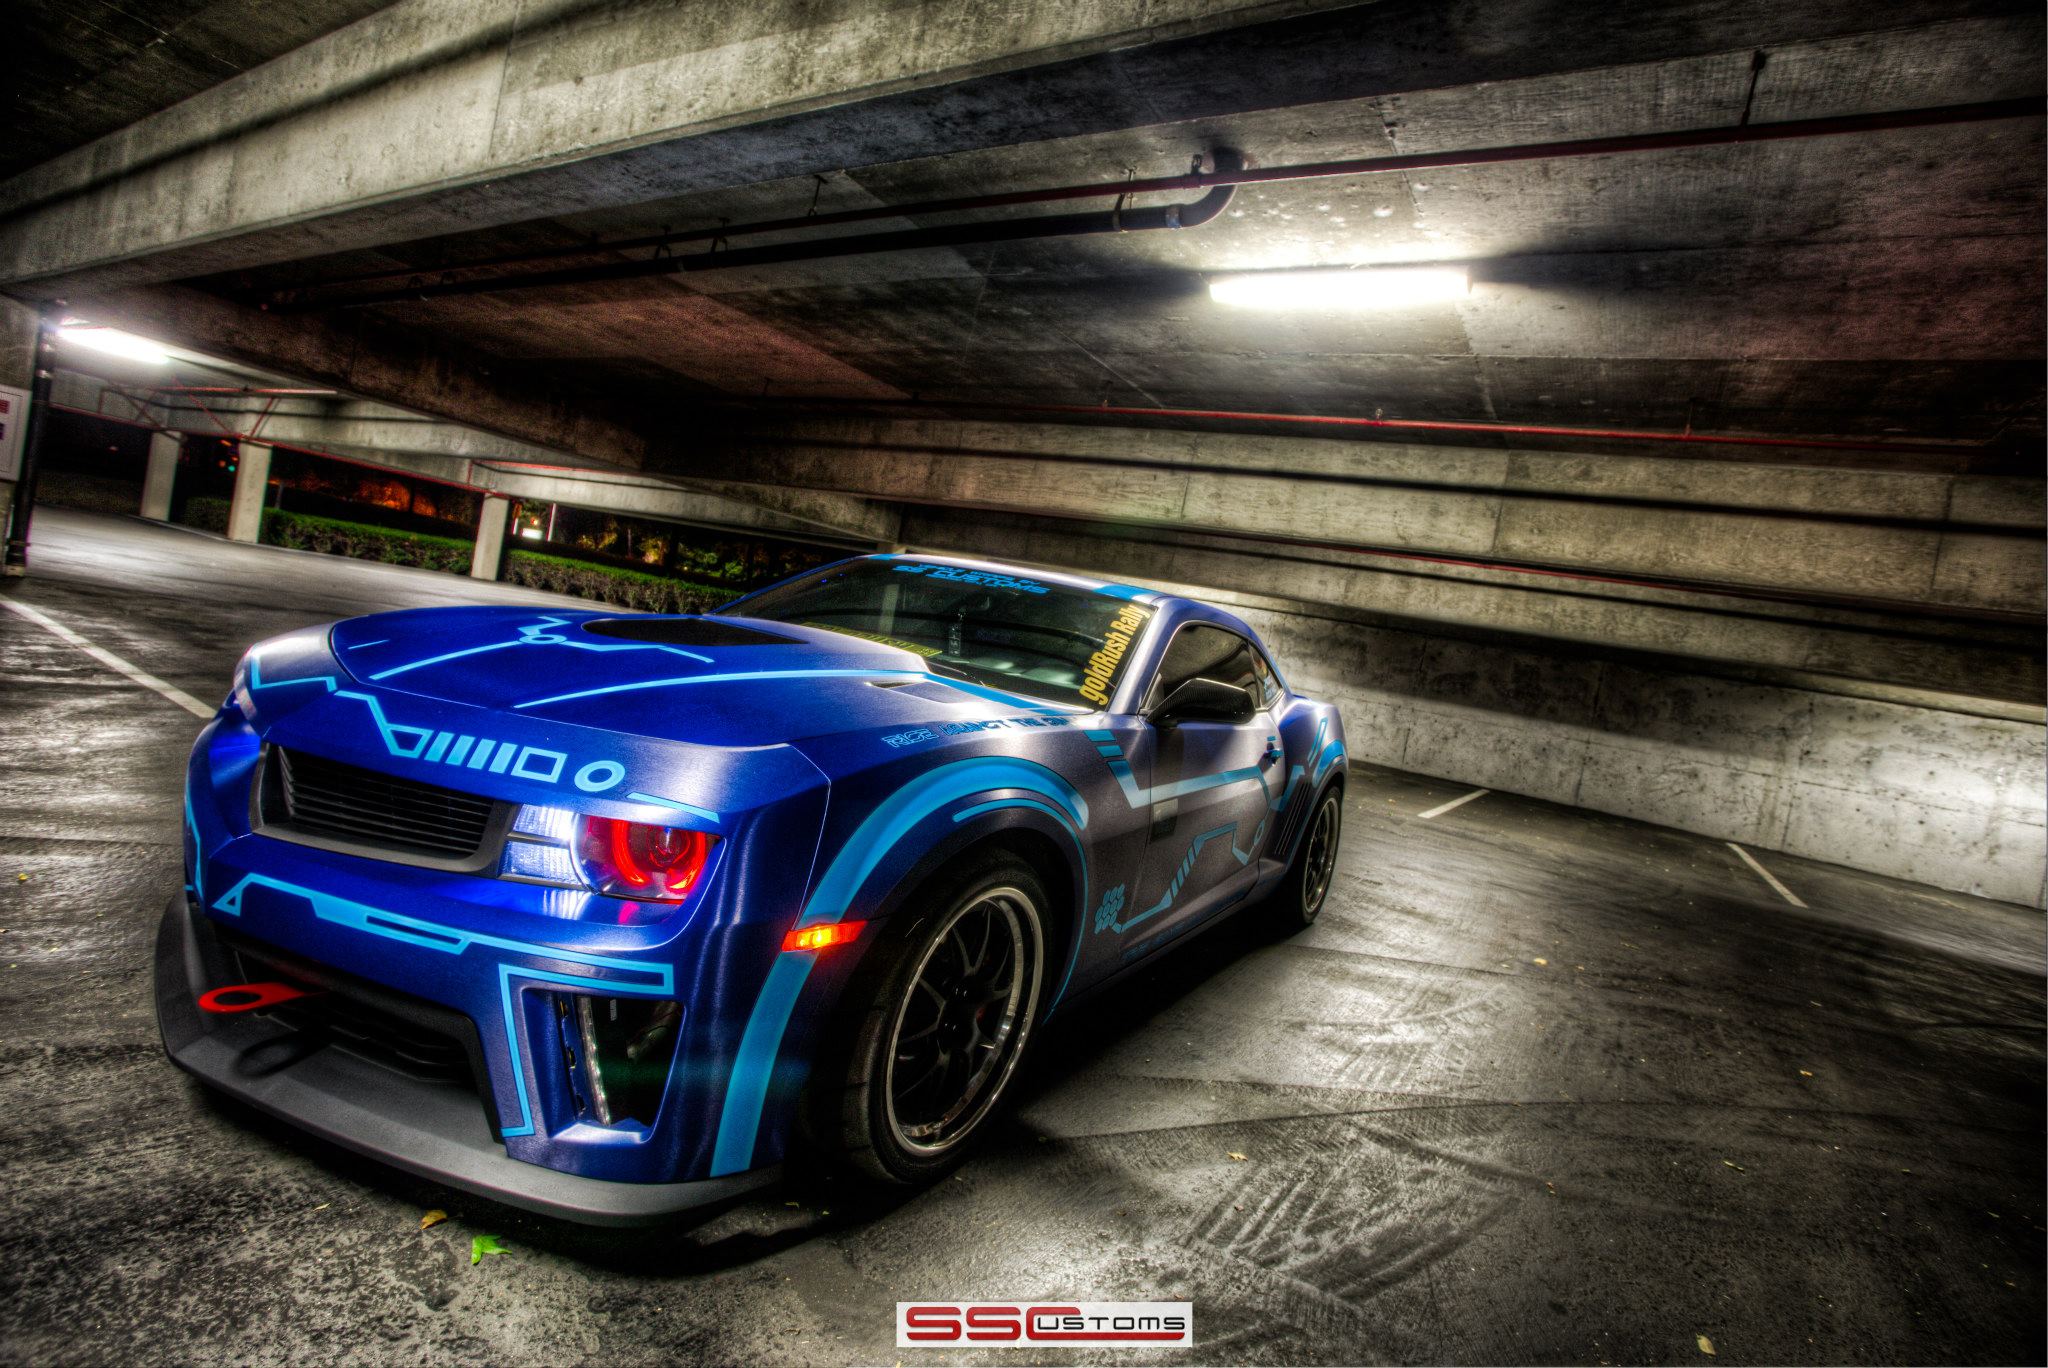 2013, Ss customs, Chevrolet, Camaro, Tuning, Muscle, Tron, Movies, Sci fi, Science, Sci Wallpaper